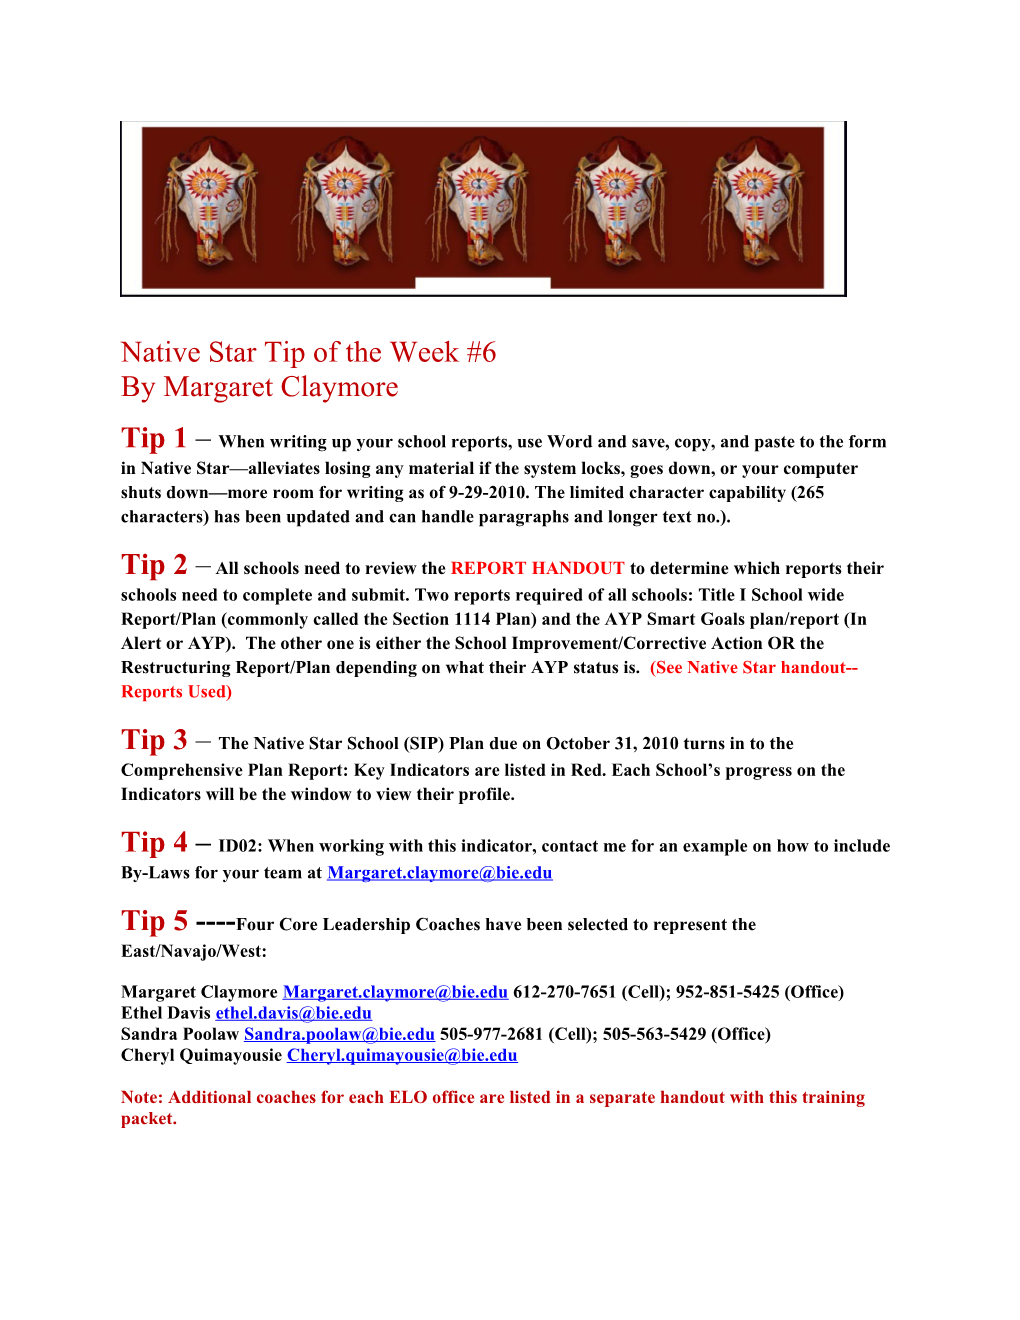 Native Star Tip of the Week #6